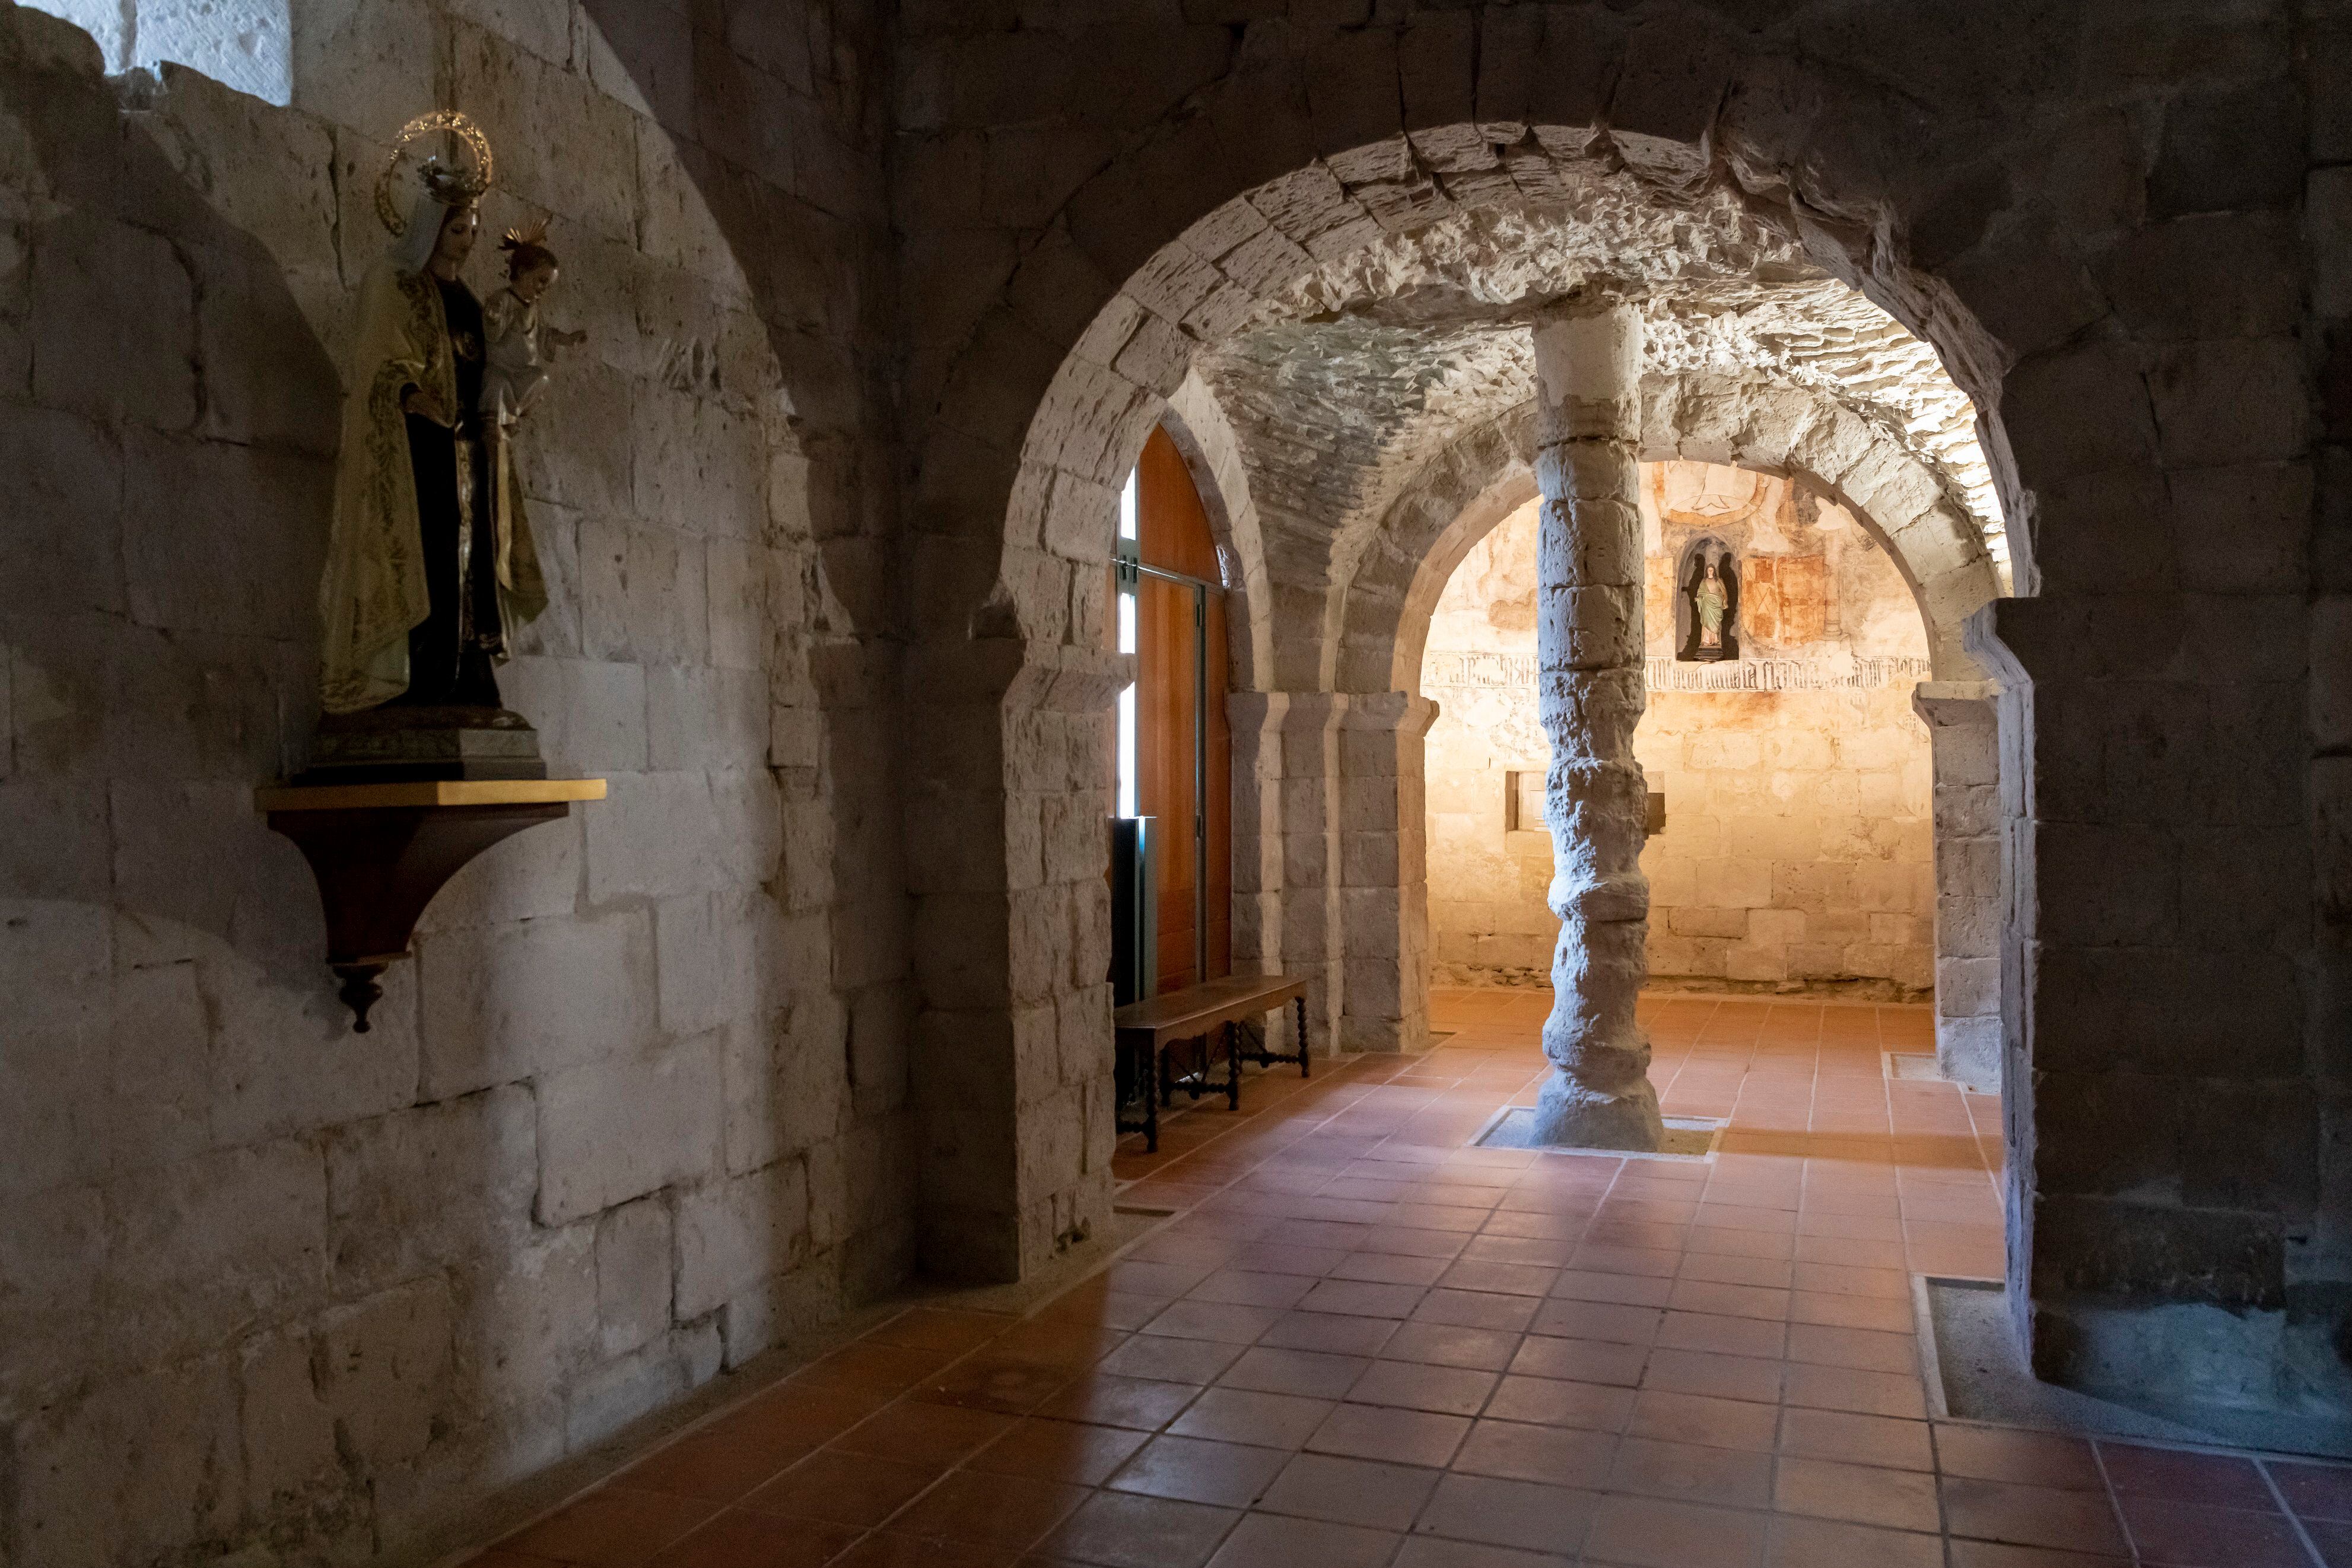 A room that joins the church of St. Mary with the area where the cloister was located.